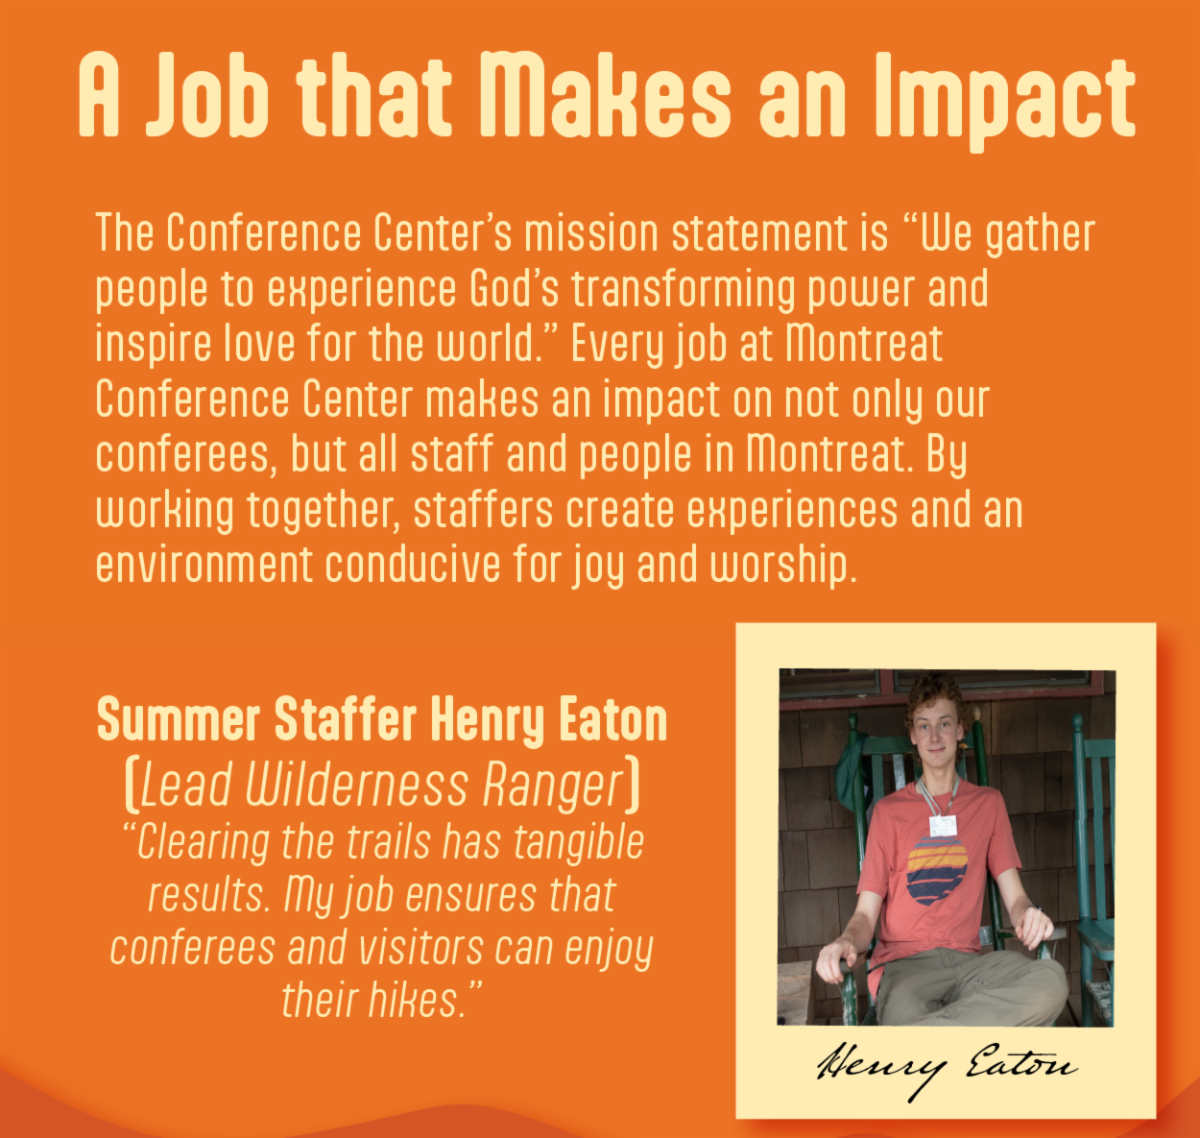 A Job That Makes an Impact - The Conference Center’s mission statement is “We gather people to experience God’s transforming power and  inspire love for the world.” Every job at Montreat Conference Center makes an impact on not only our conferees, but all staff and people in Montreat. By  working together, staffers create experiences and an environment conducive for joy and worship. Summer Staffer Henry Eaton, lead wilderness ranger explains, “Clearing the trails has tangible results. My job ensures that conferees and visitors can enjoy their hikes.”